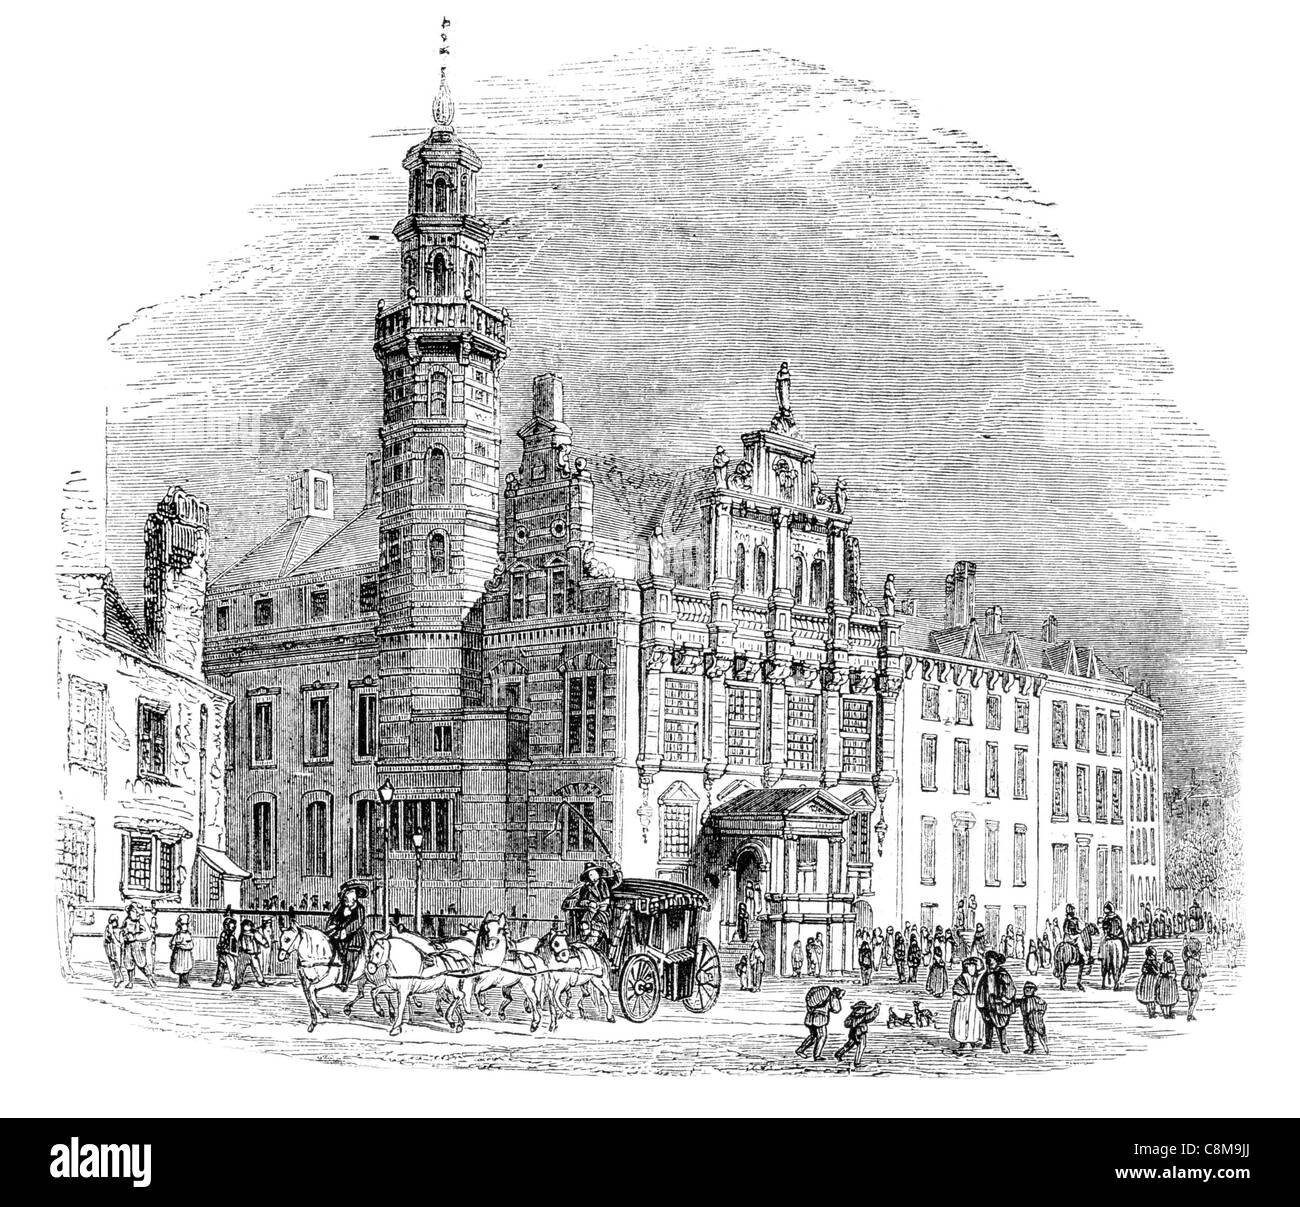 Den Haag oude stadhuis Old City Hall The Hague Renaissance style Groenmarkt Grote Kerk civic wedding Royal family hall grand Stock Photo